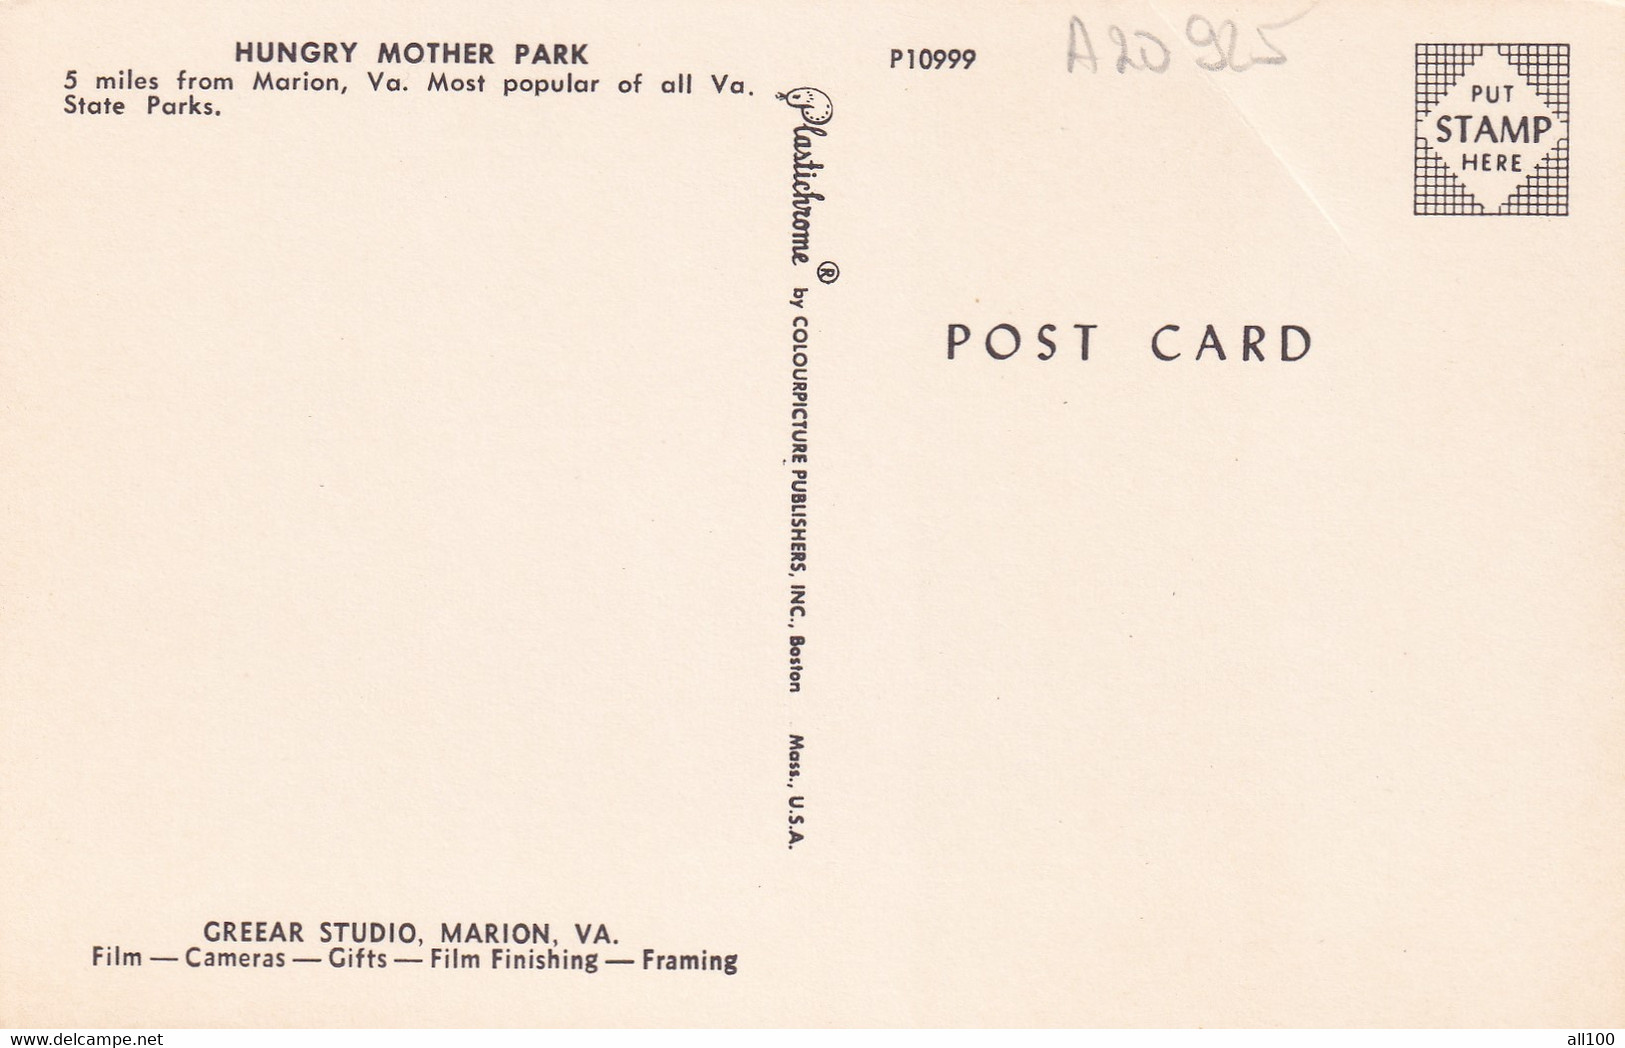 A20925 - HUNGRY MOTHER PARK MARION VIRGINIA USA UNITED STATES OF AMERICA POST CARD UNUSED SHAWNEE INDIANS NEW RIVER - Parques Nacionales USA